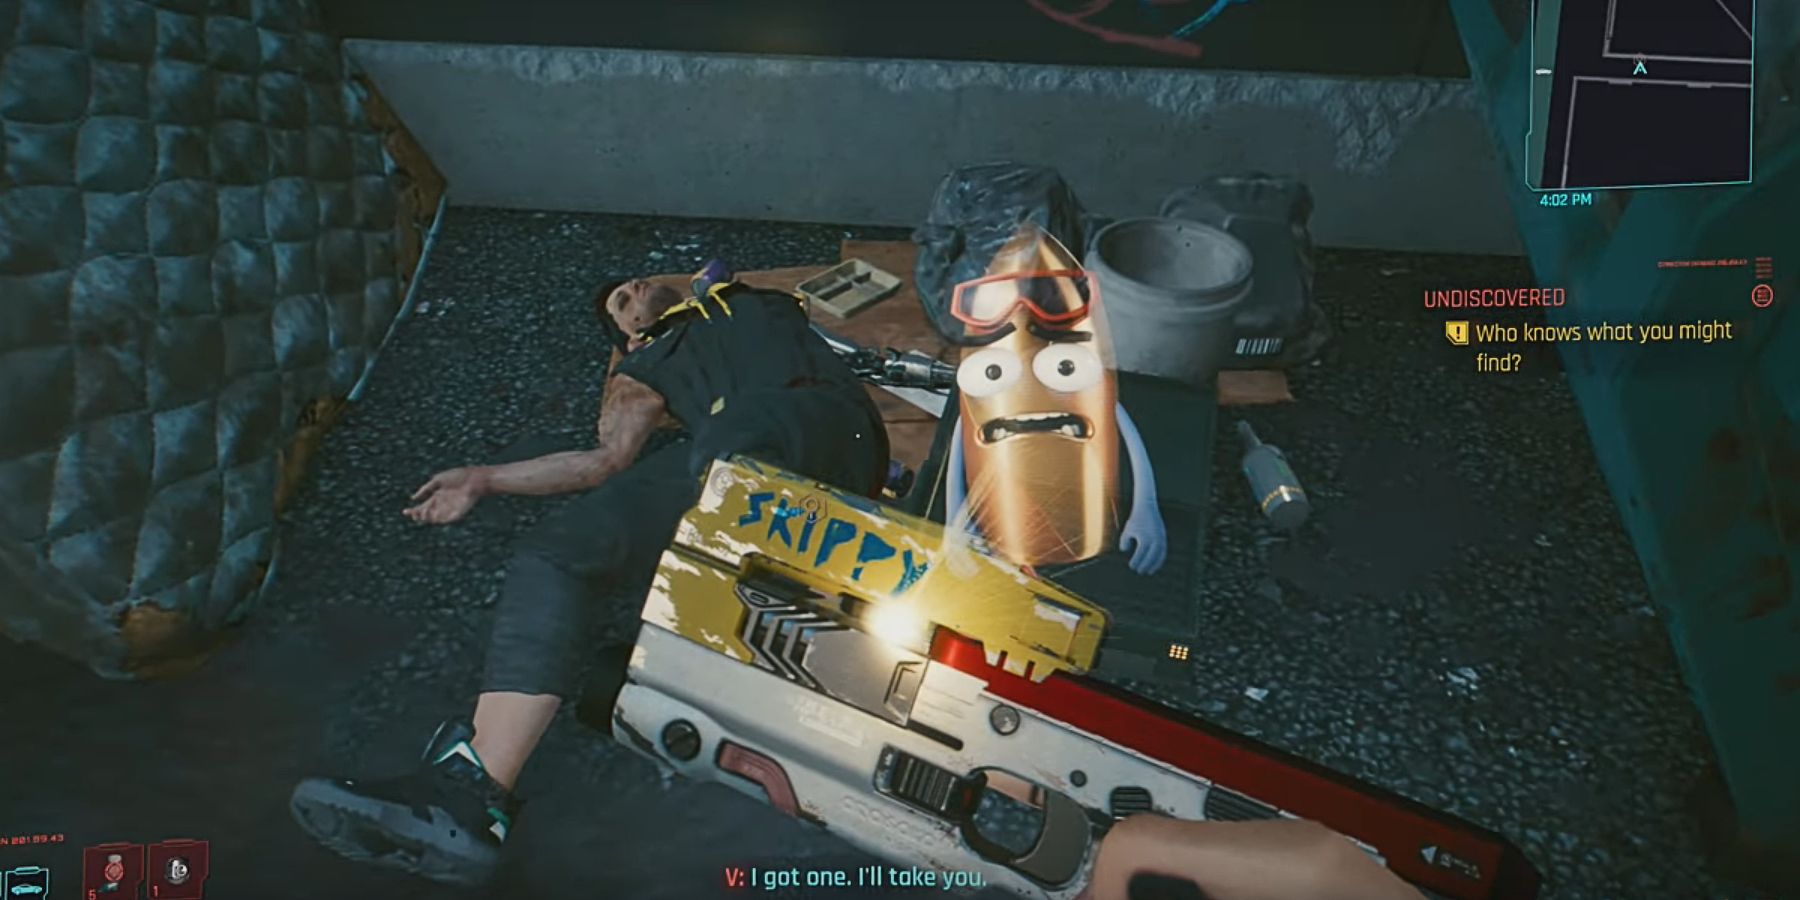 V holding Skippy that is projecting his sad bullet mascot. There is also a man's corpse lying on the ground. V's dialogue text contains, "I got one. I'll take you."